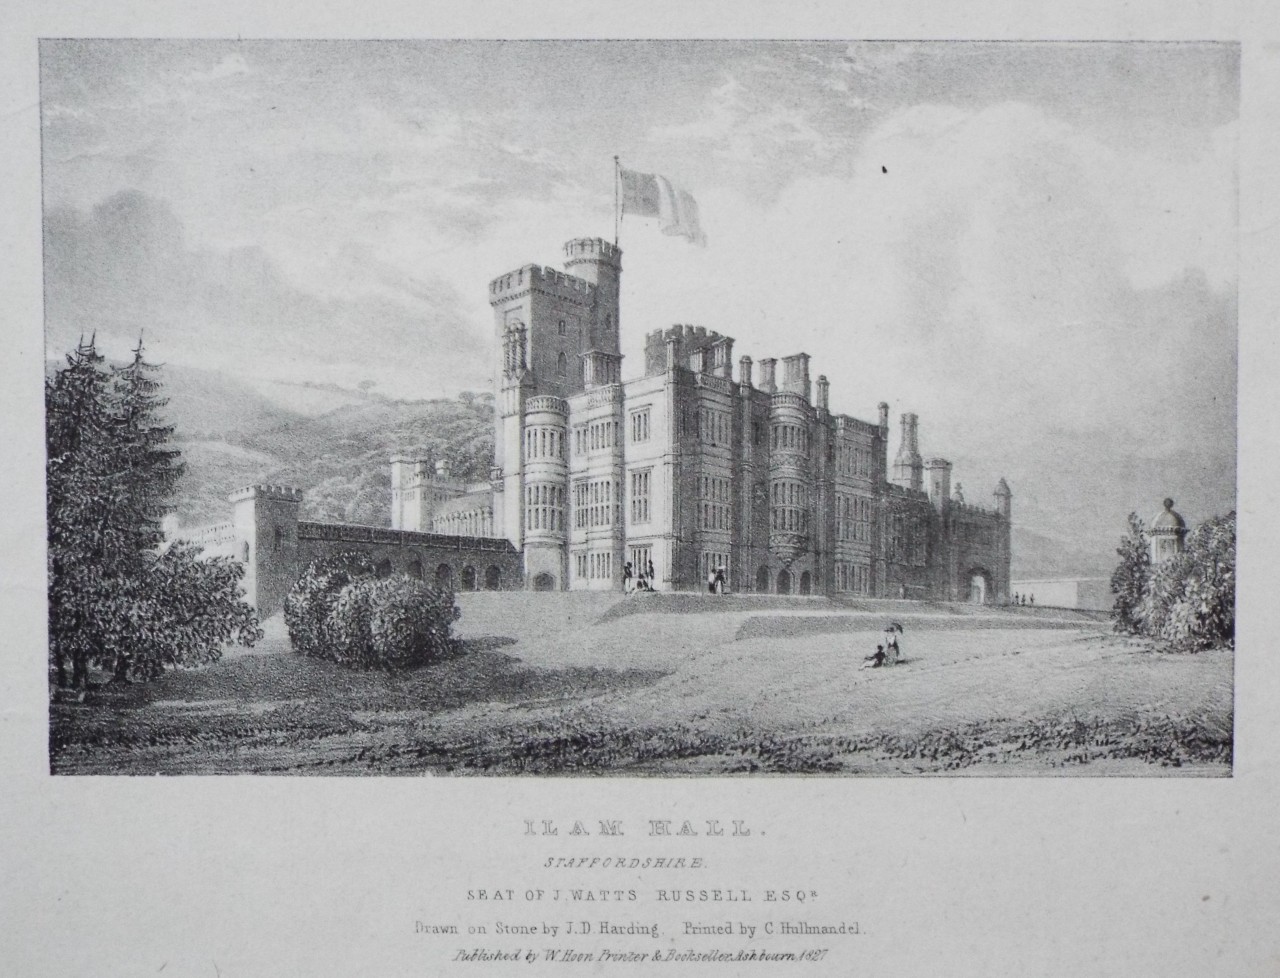 Lithograph - Ilam Hall, Staffordshire. Seat of J. Watts Russell Esqr. - Harding